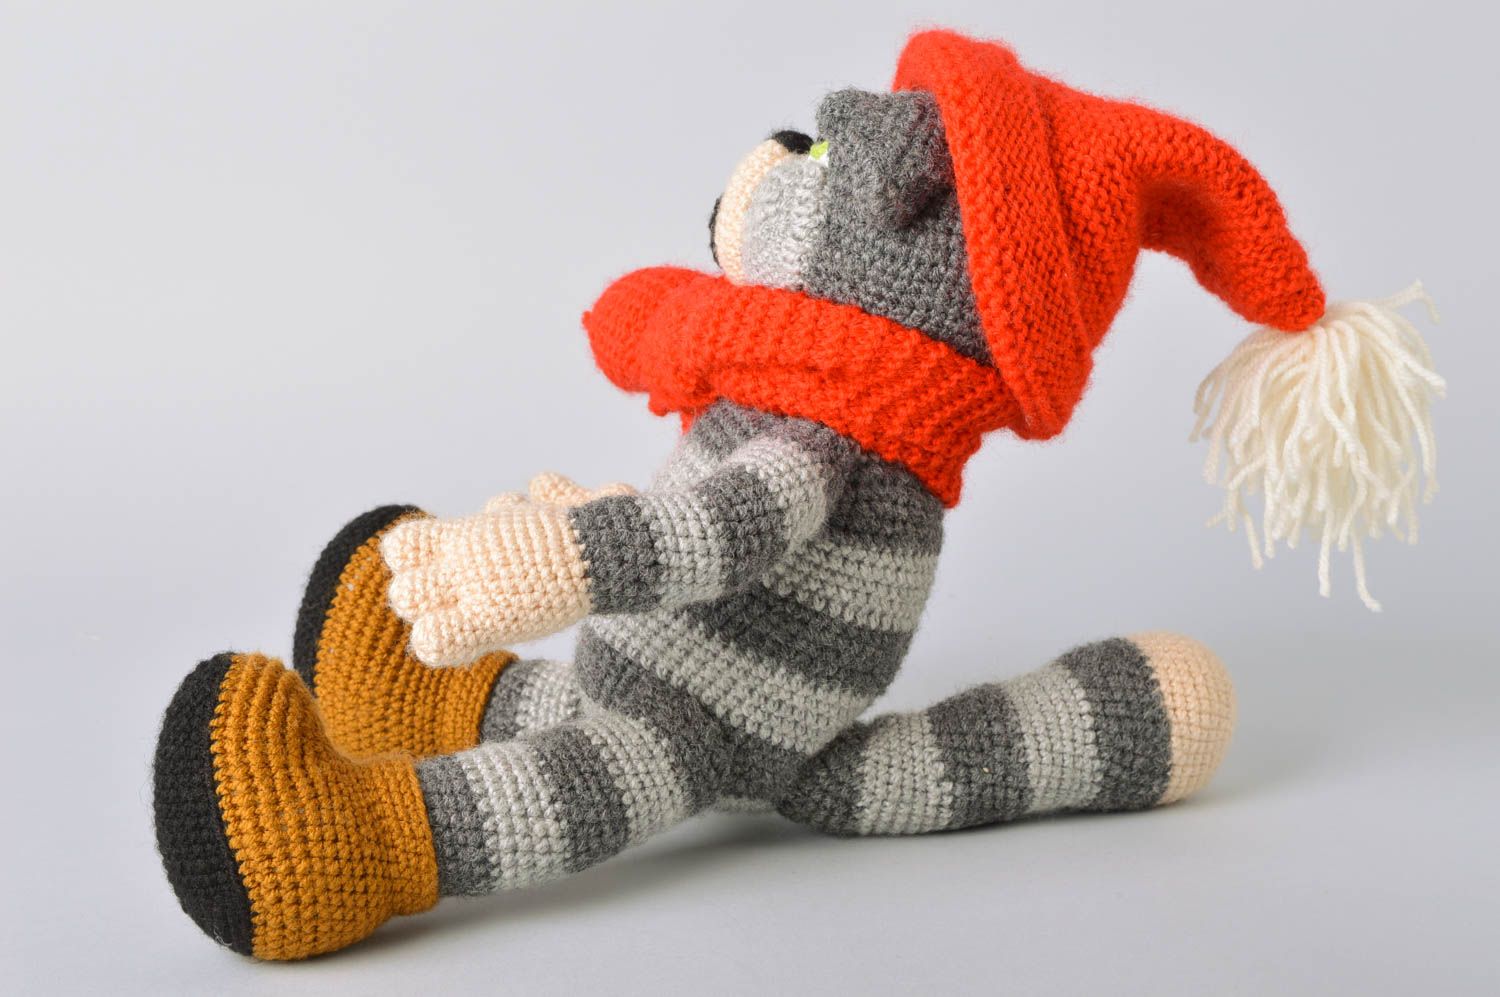 Handmade designer crochet toy striped gray cat in red hat and scarf photo 4